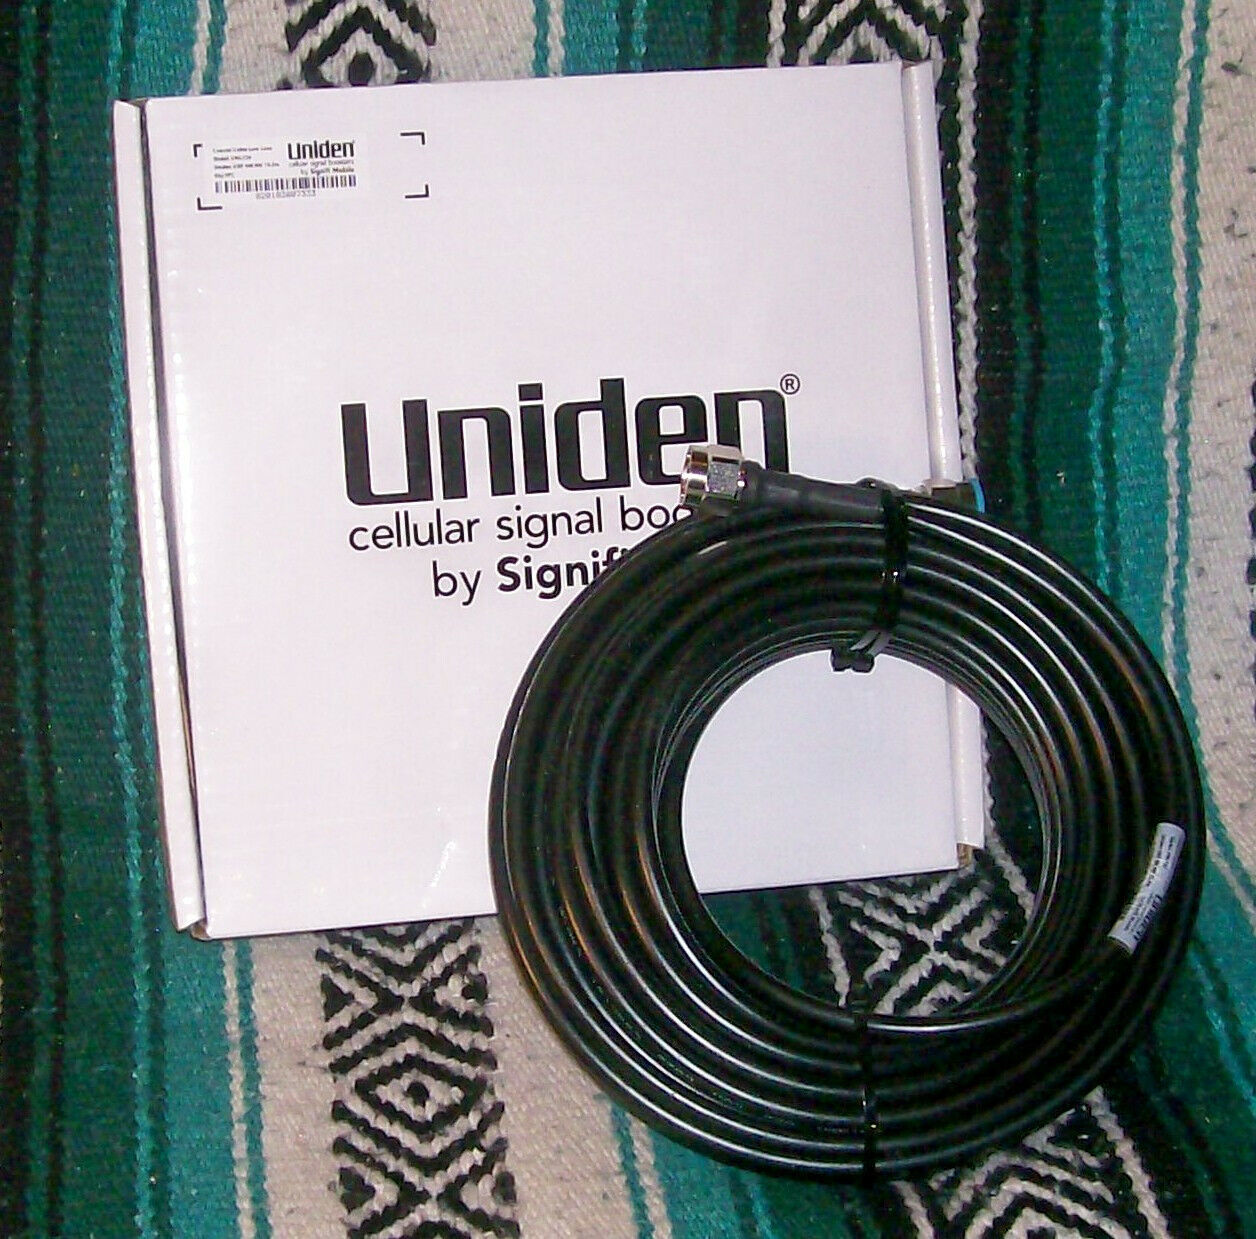 UNIDEN LOW LOSS 9m COAXIAL CABLE UNI-103 .. satellite, cellular antenna systems